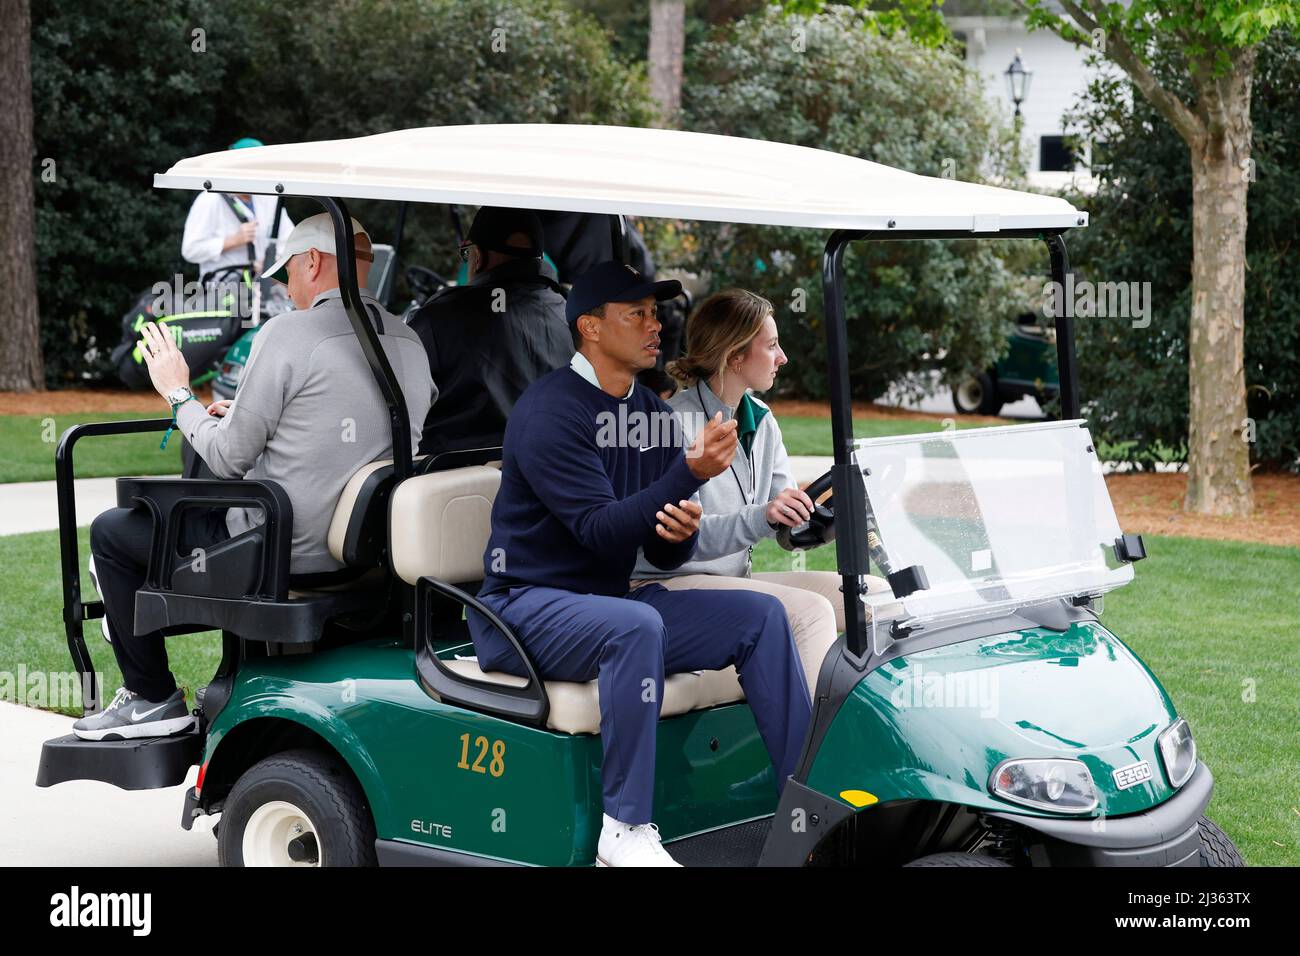 Augusta, GA - April 05: Tiger Woods gets a ride on a golf cart as he leaves  the practice range on April 5, 2022 before the start of the 2022 Masters at